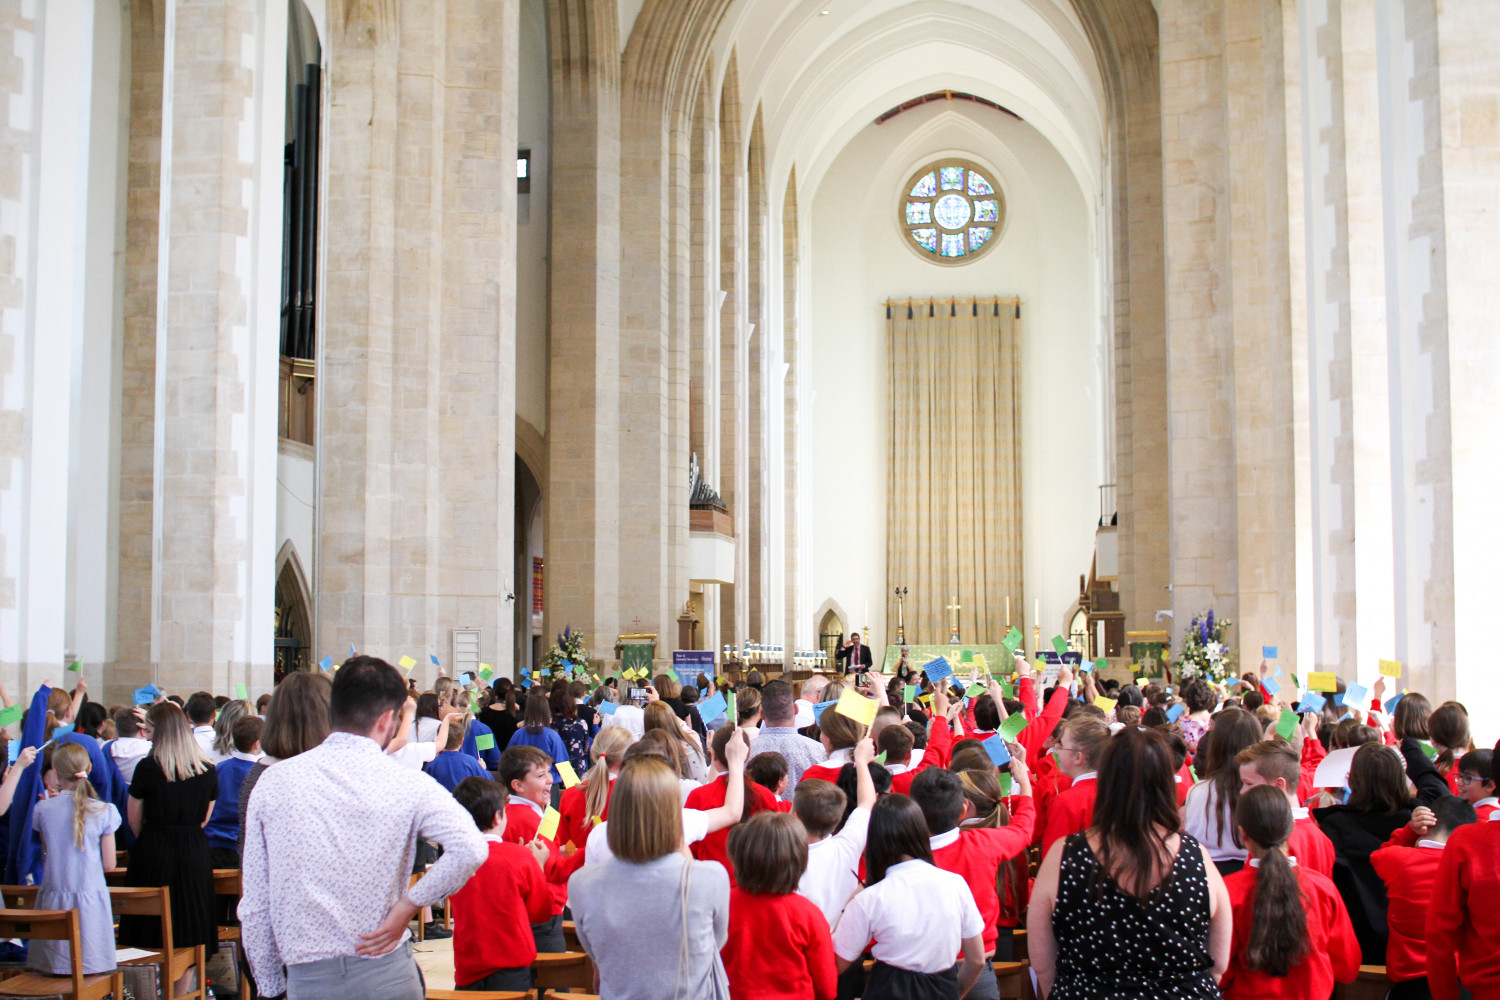 School children holding up flags and celebrating in Guildford Cathedral